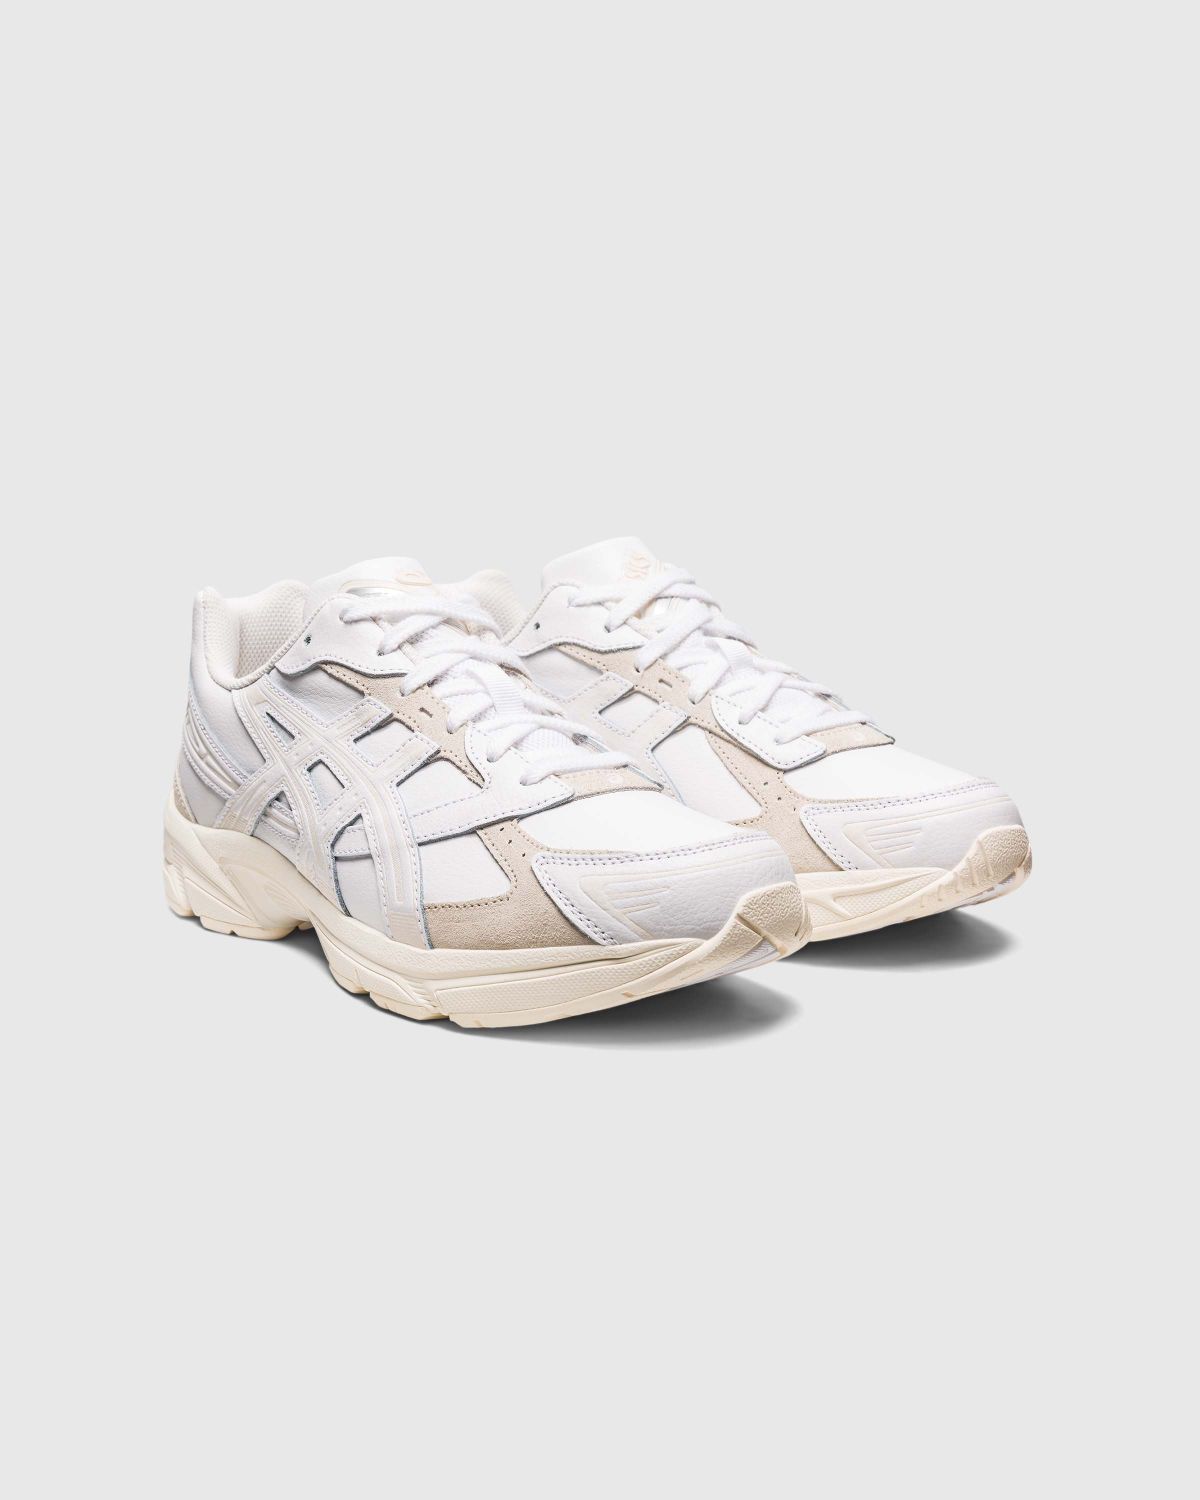 asics – GEL-1130 White - Low Top Sneakers - White - Image 3